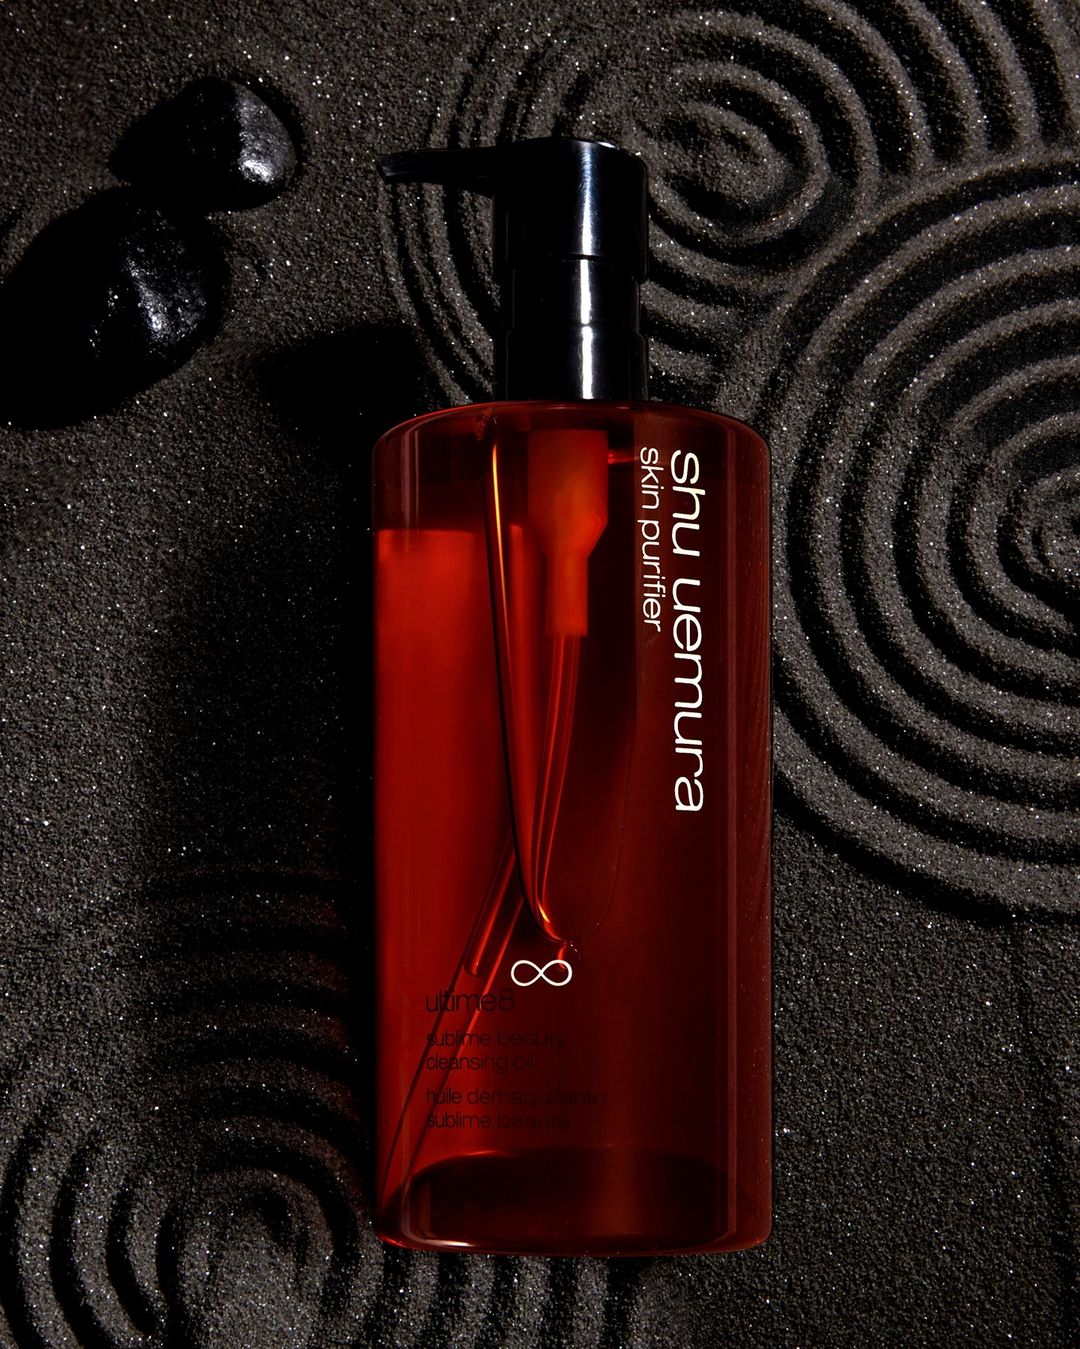 shu uemura - treat your skin to an infusion of asian life-energizing plants such as japanese camellia, korean ginseng, and golden bamboo. 🎍 ultime8∞ sublime beauty cleansing oil renews skin quality, l...